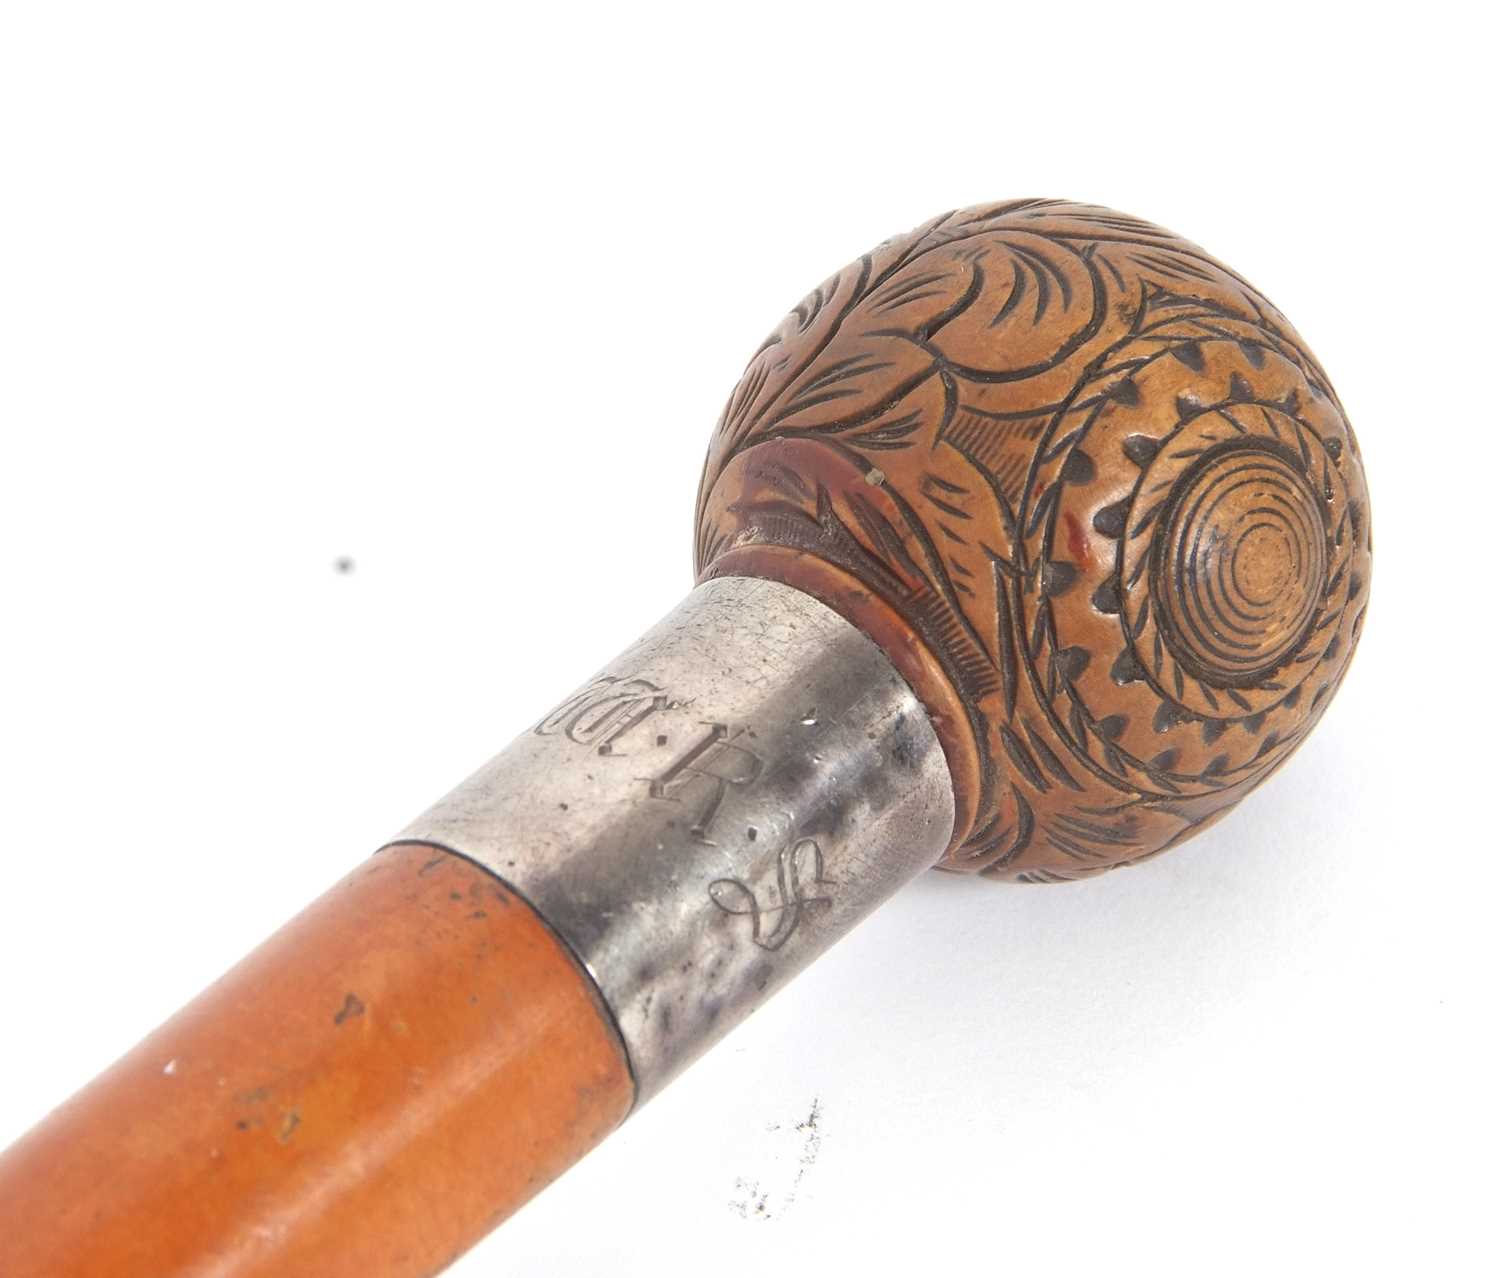 An antique walking stick with ball finial, carved with foliate and geometric designs with a metal